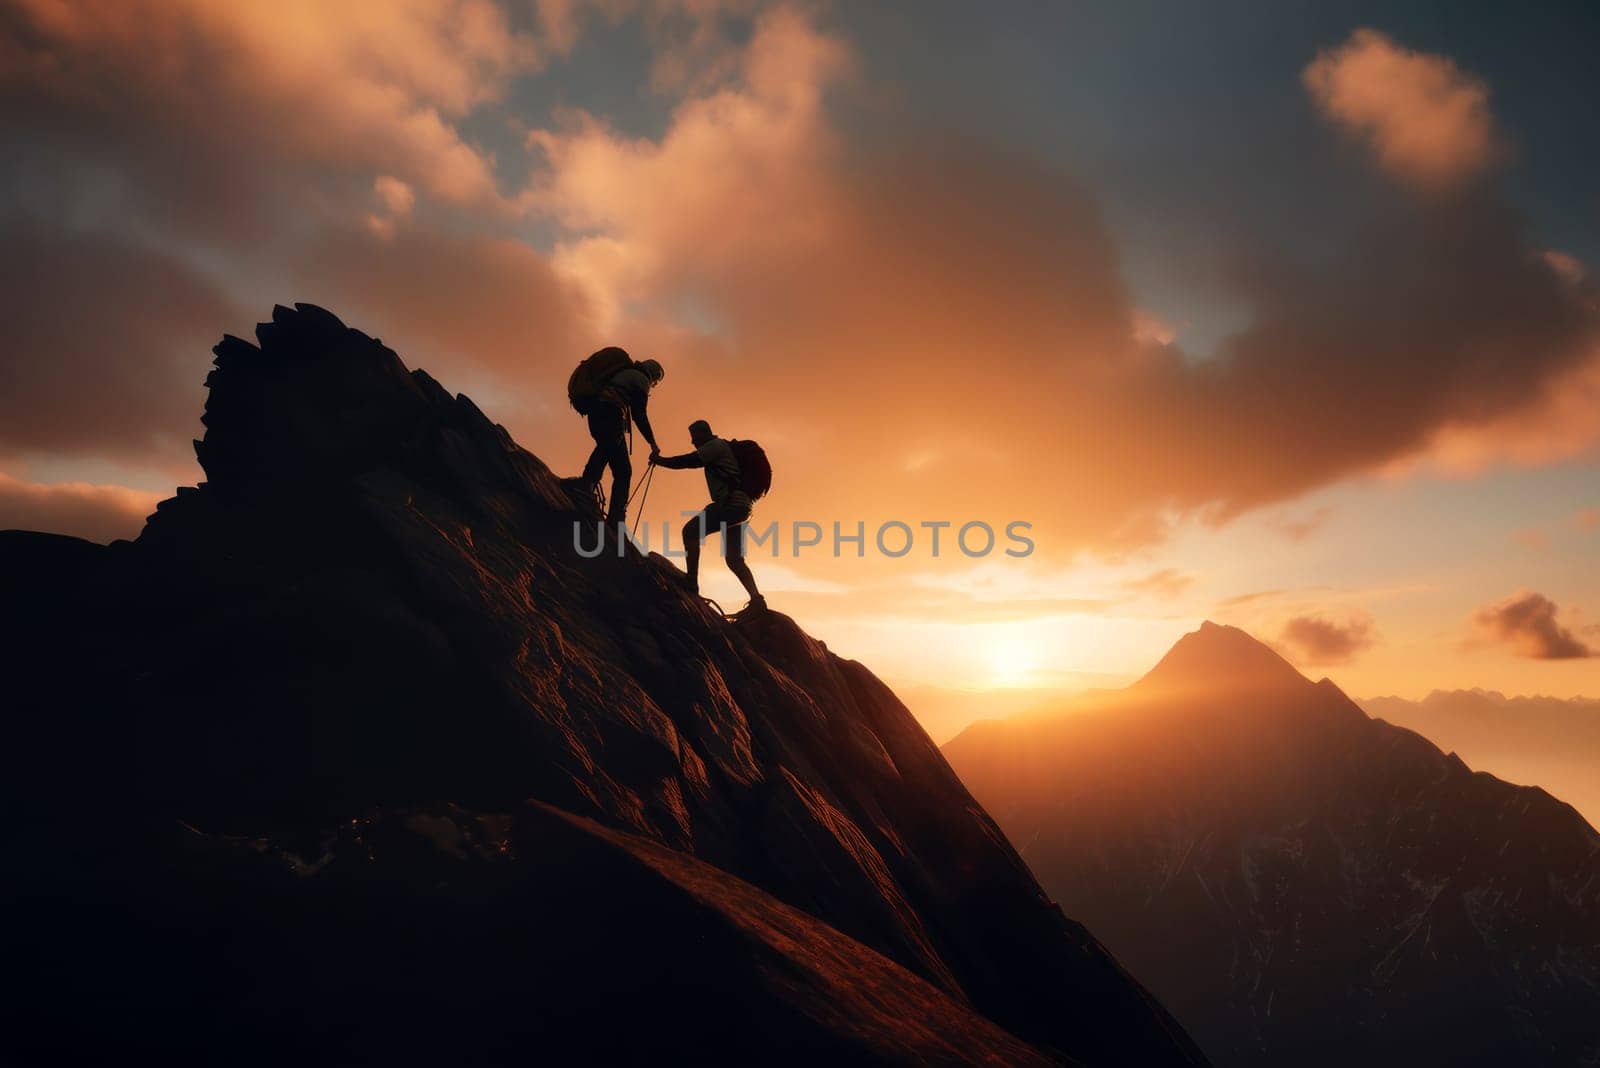 Silhouettes of people climbing the mountain. Business support concept